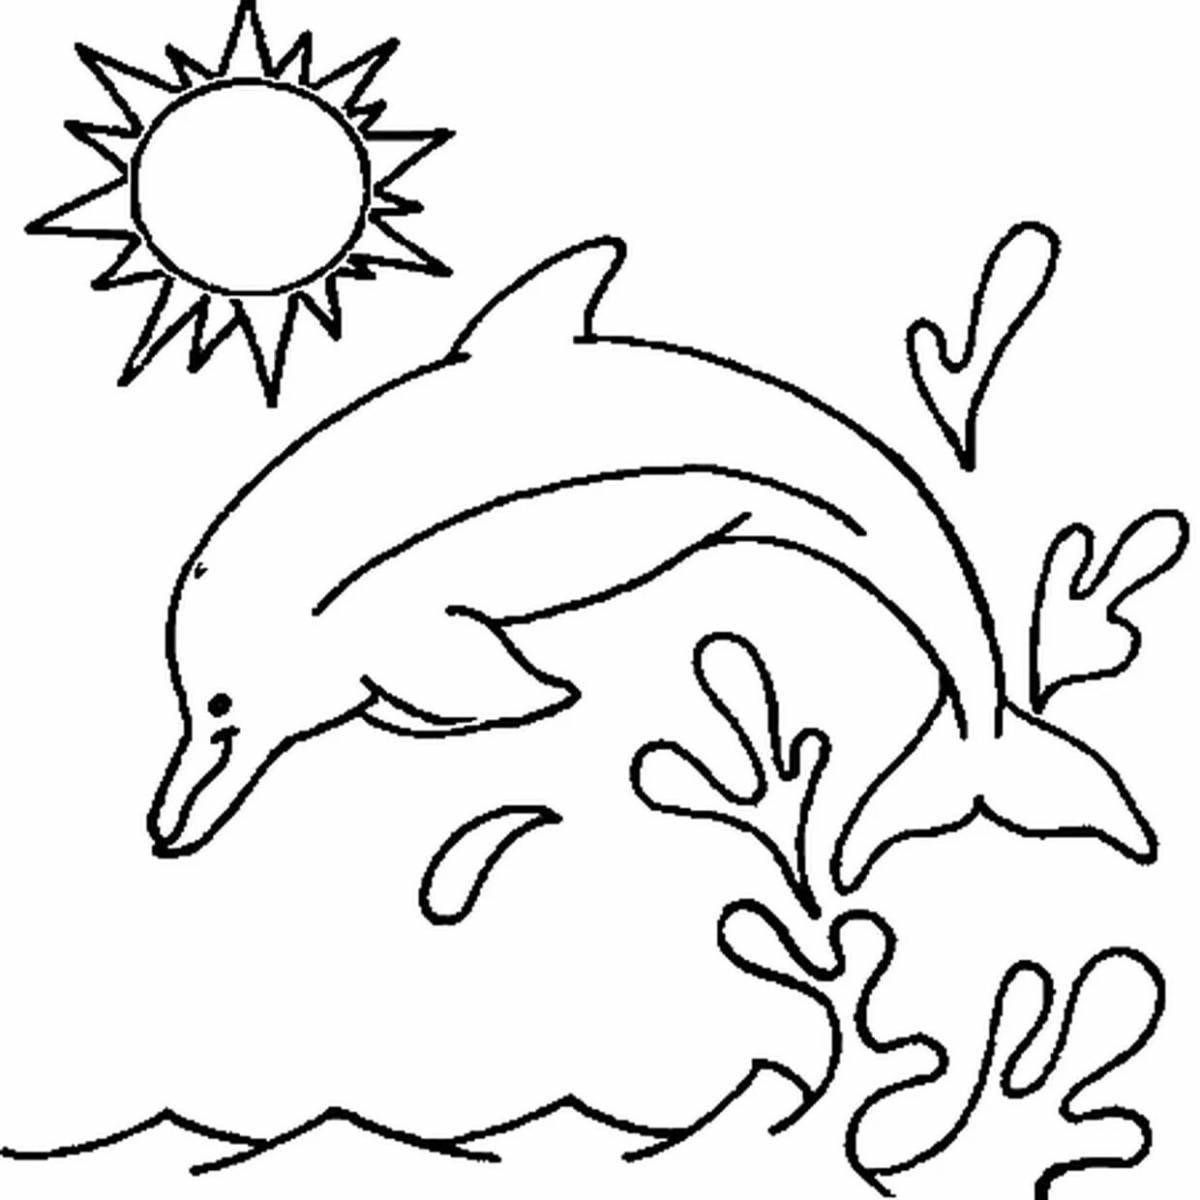 Coloring pages of dolphins for kids